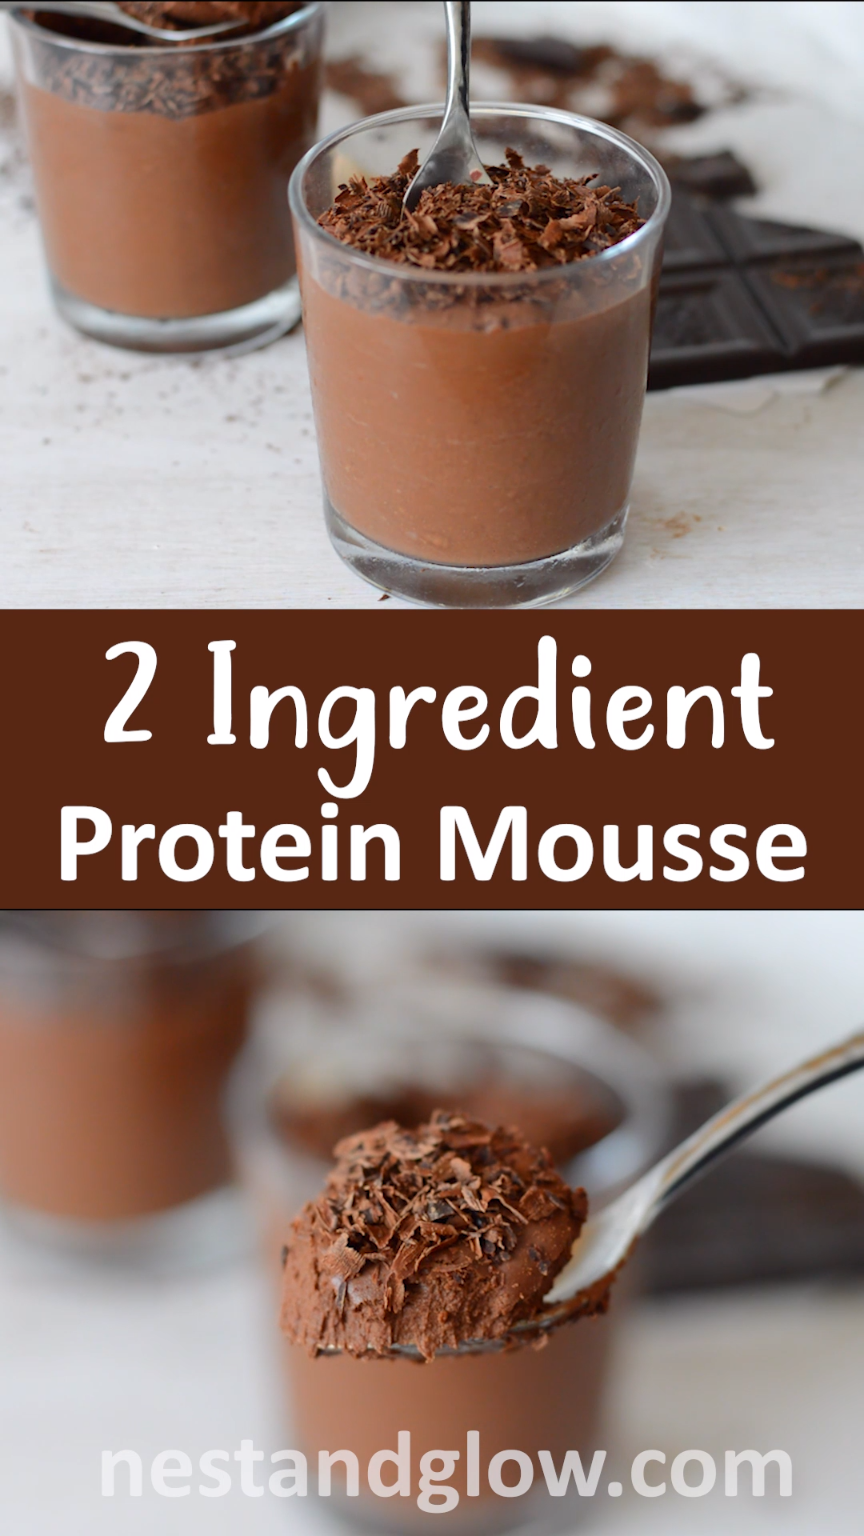 2 Ingredient Vegan Protein Chocolate Mousse -   18 healthy recipes Protein nutrition ideas